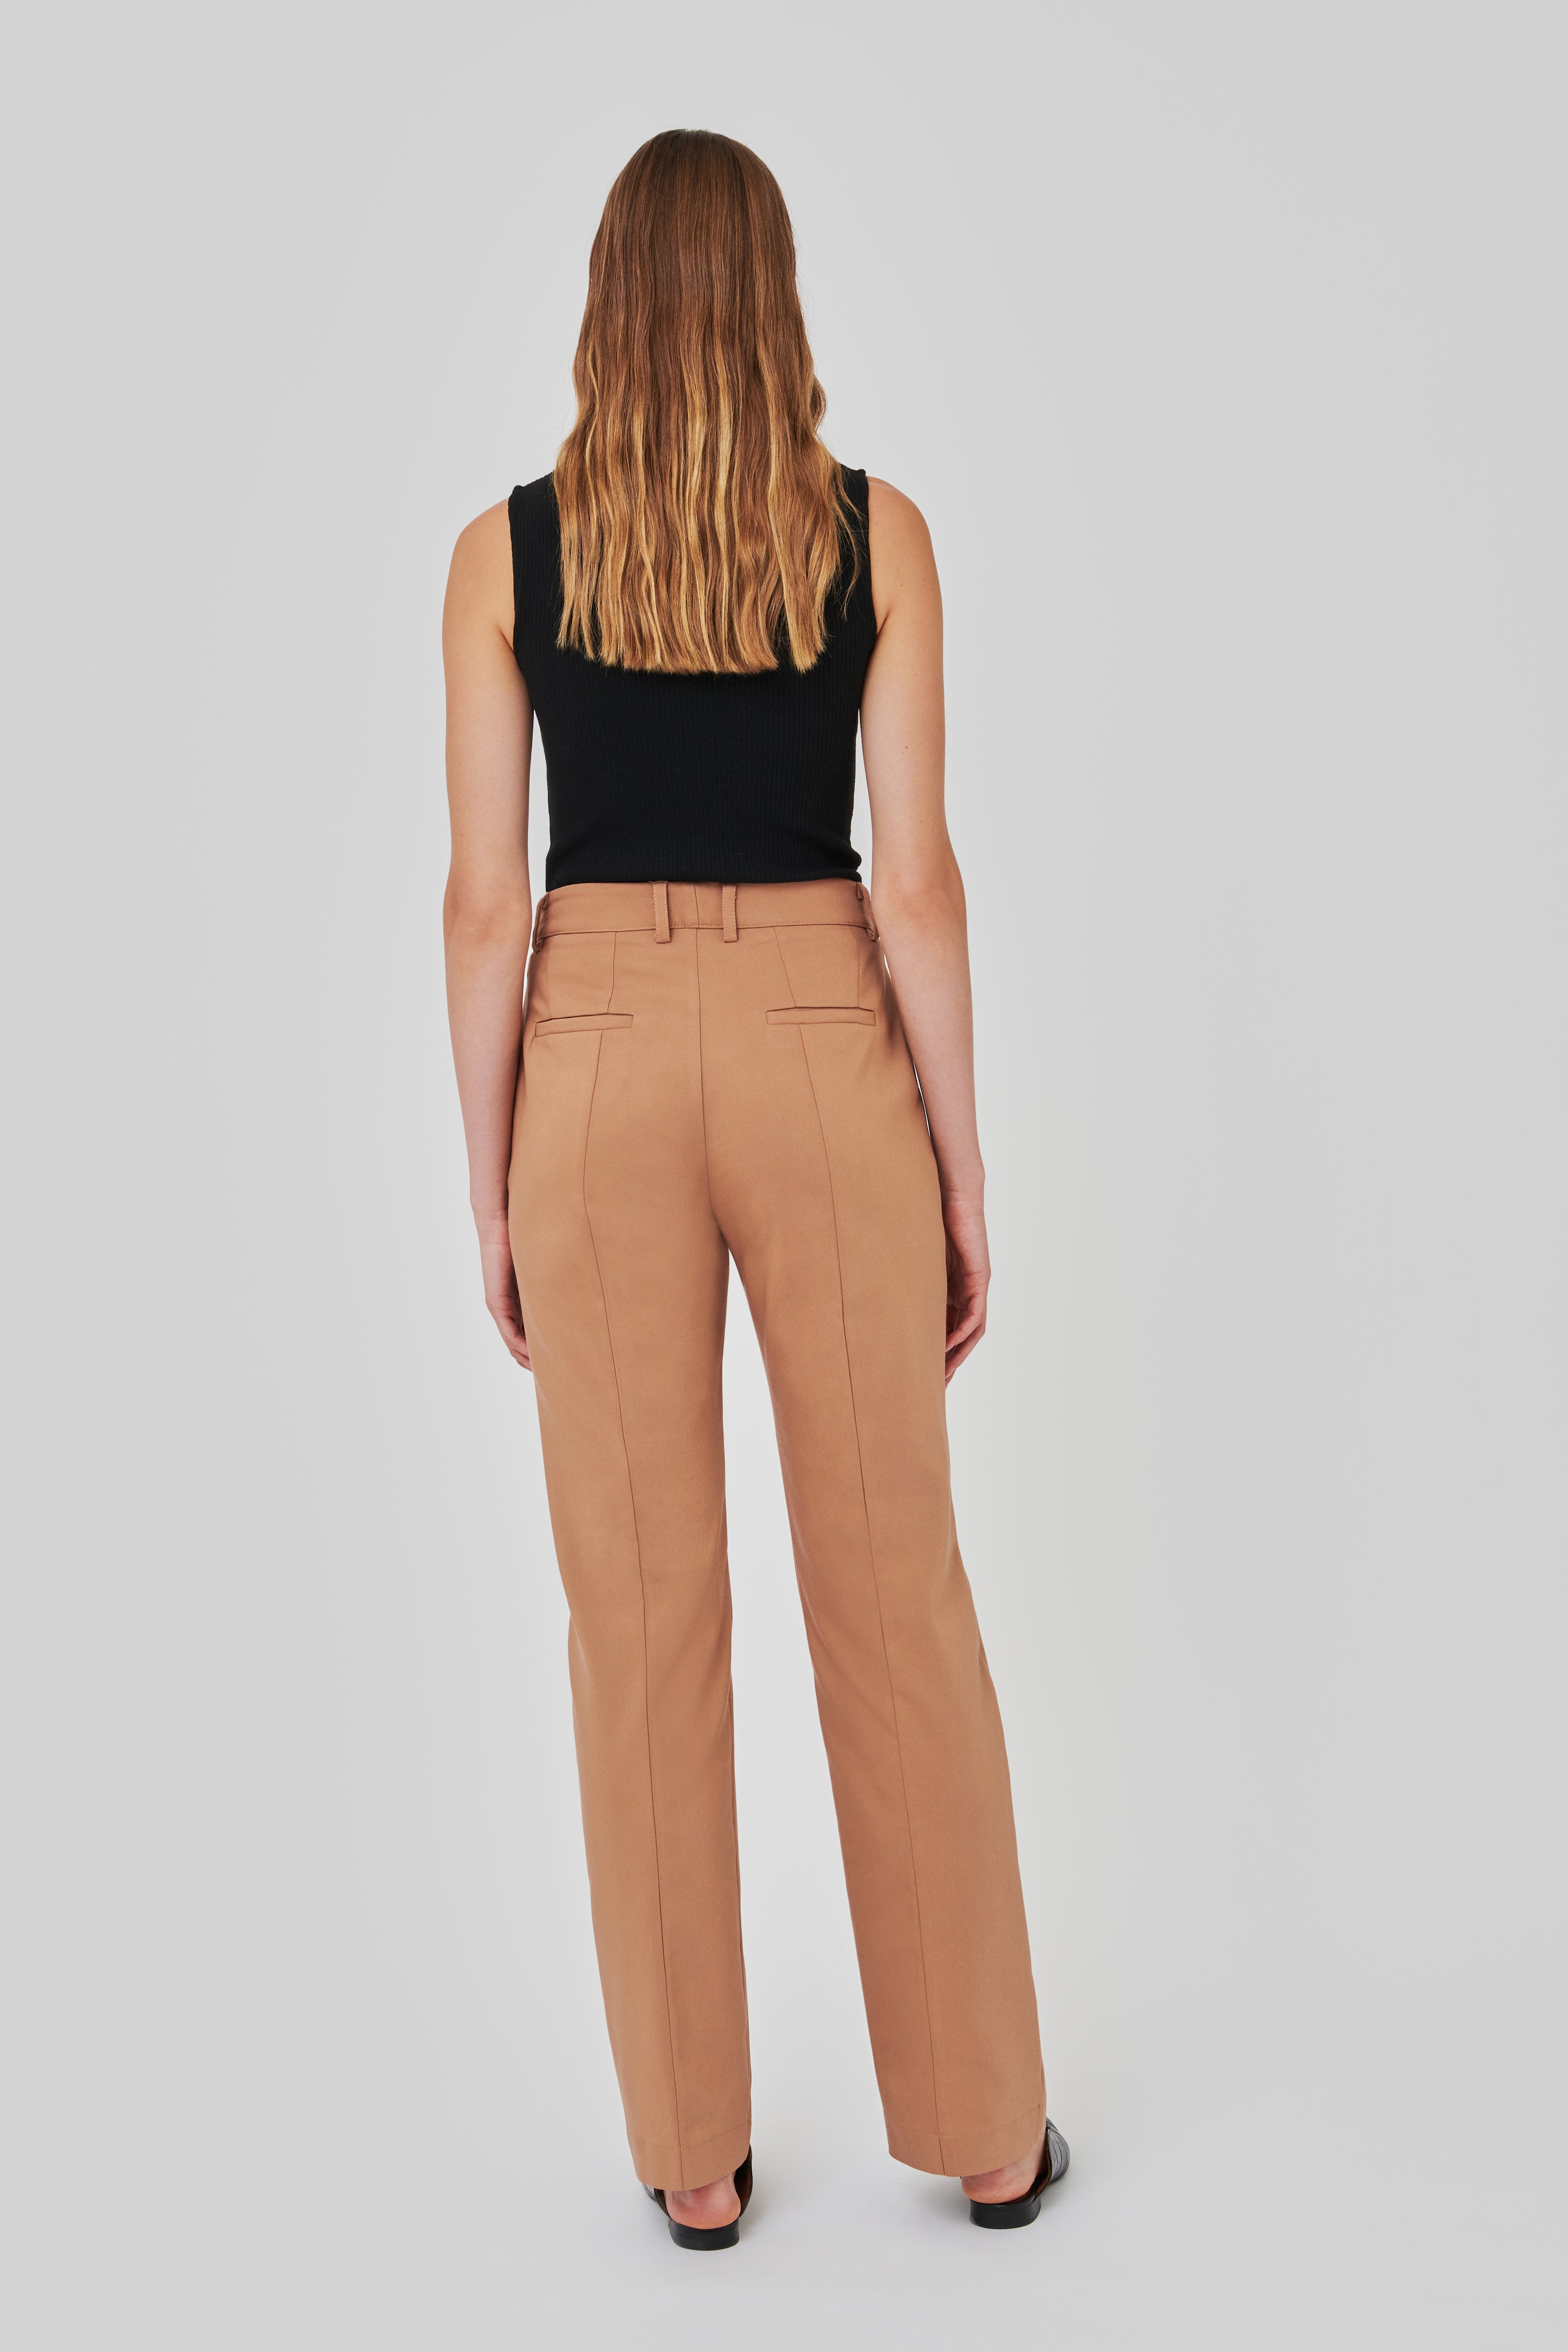 The Sand Cotton Lover Pants